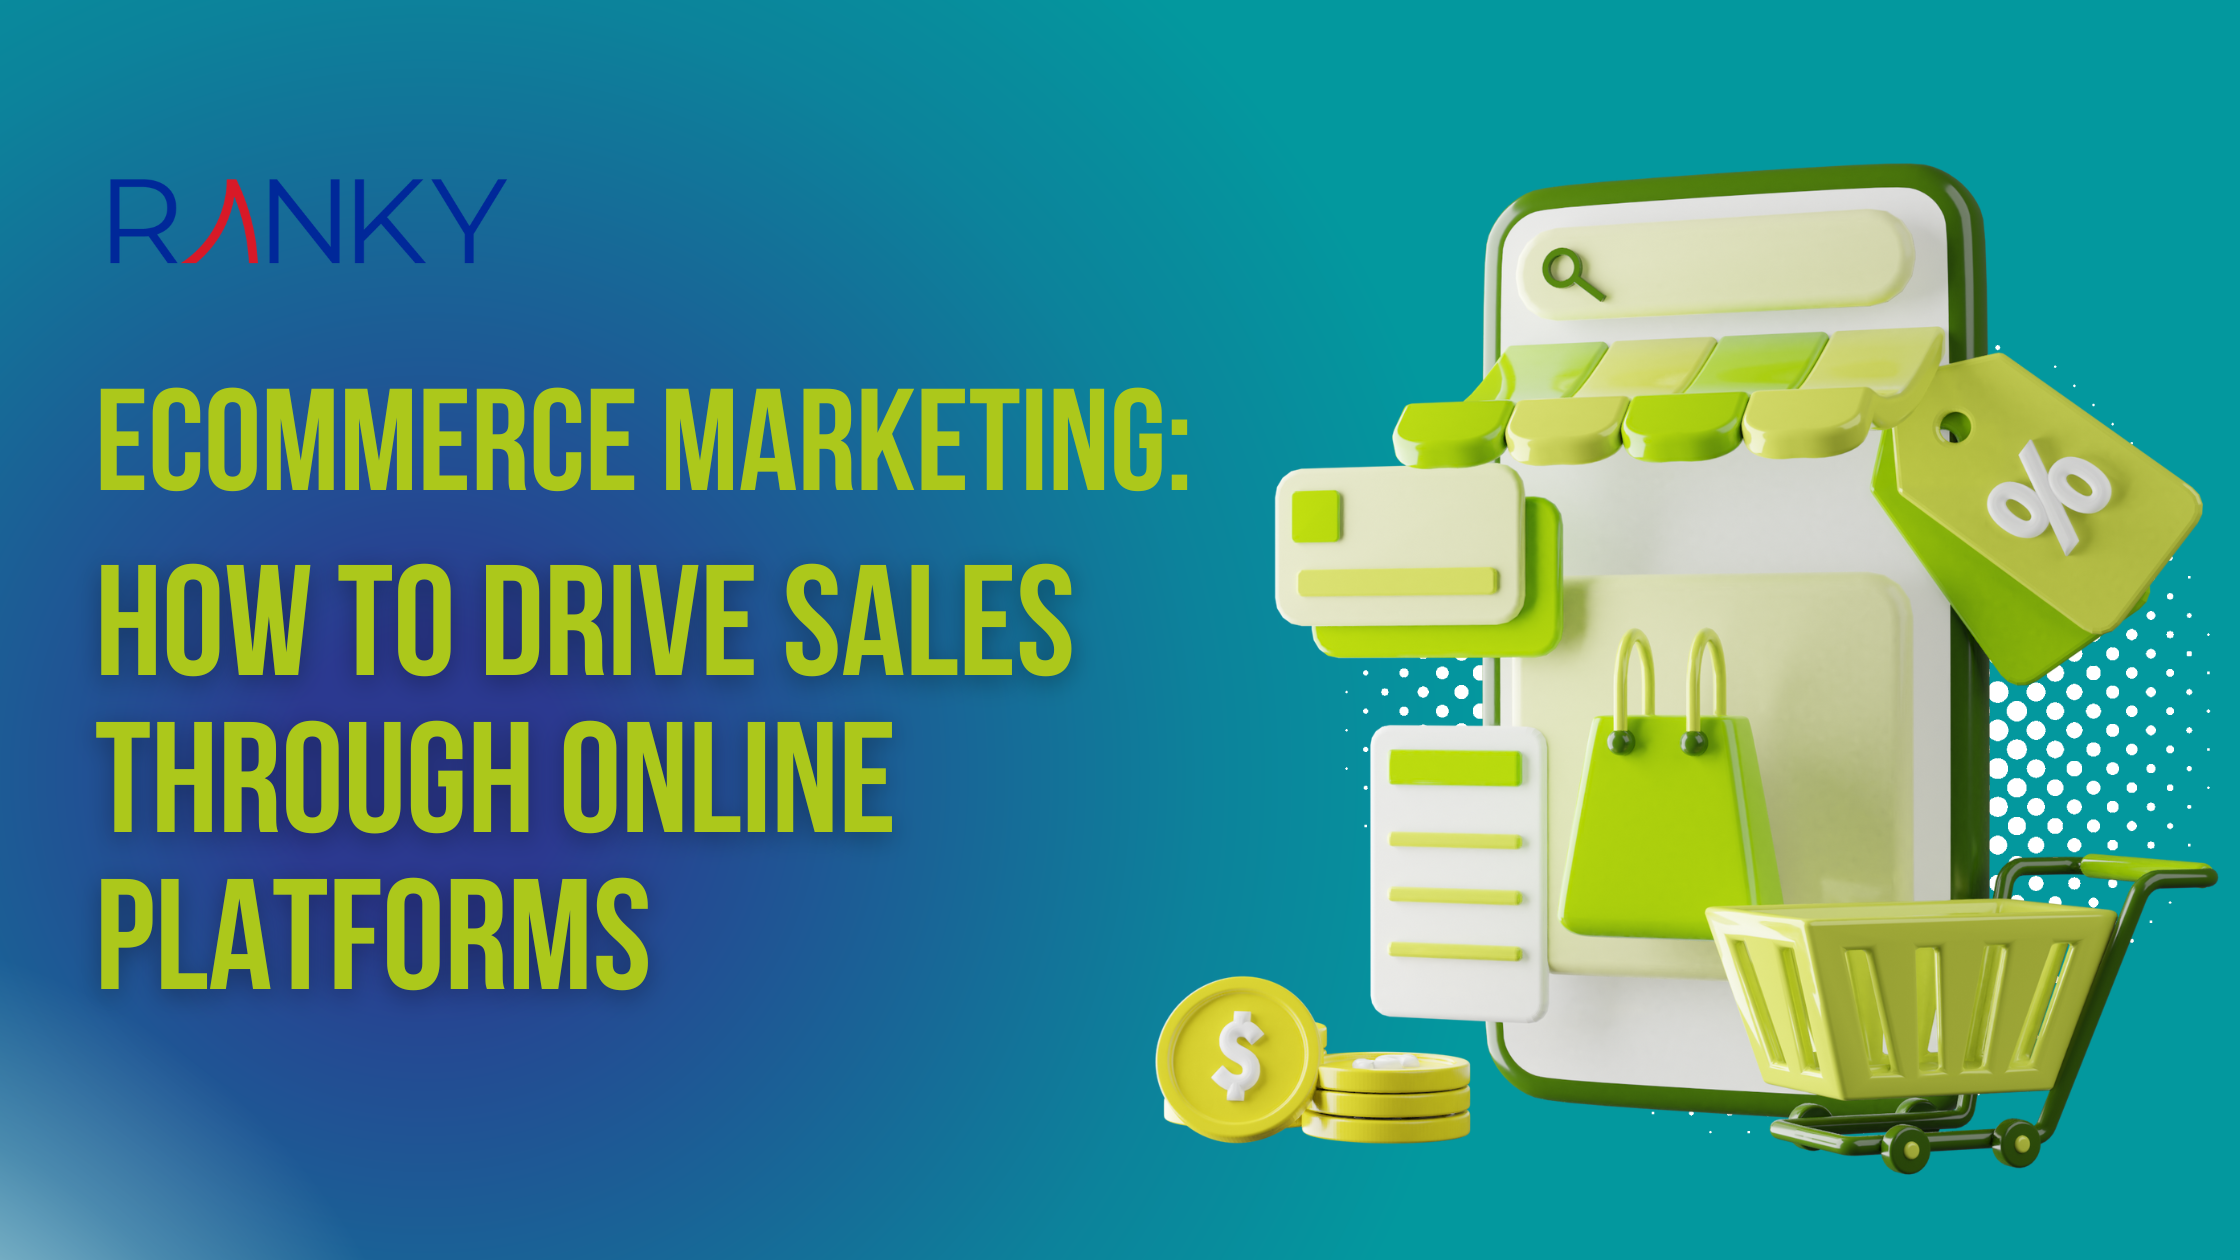 eCommerce Marketing: How to Drive Sales Through Online Platforms